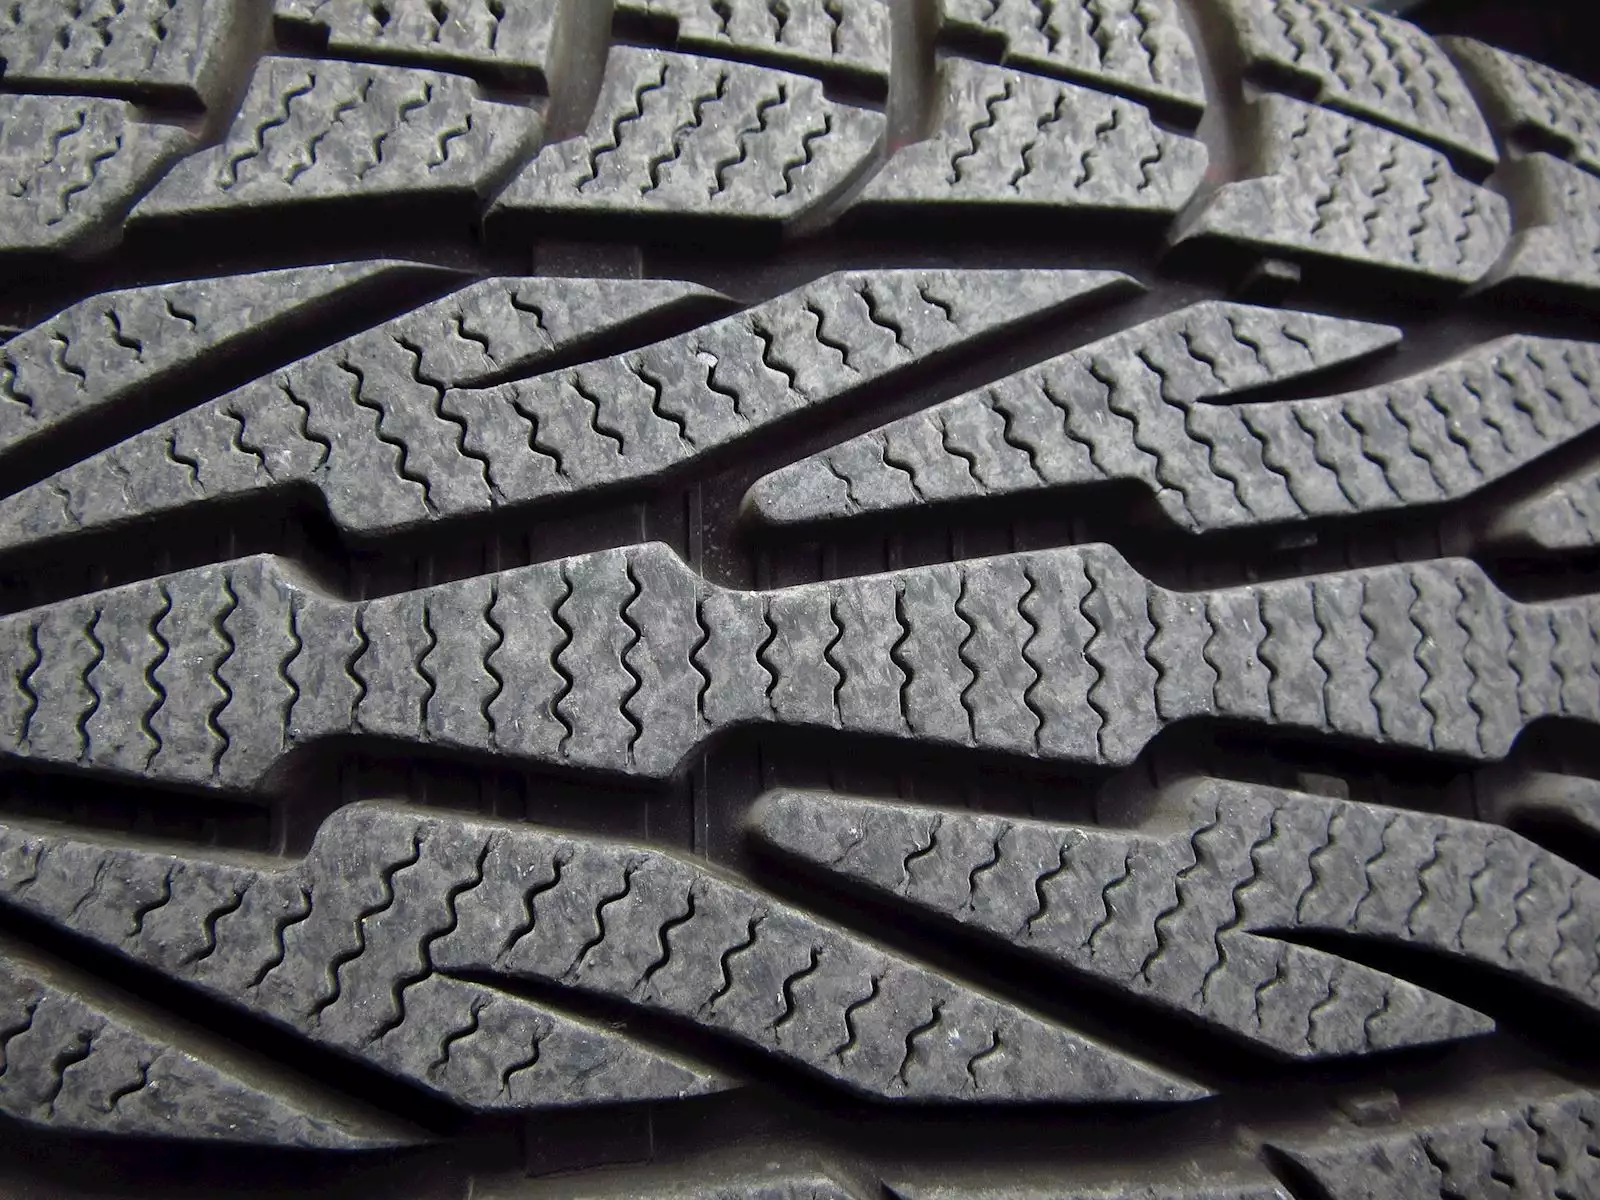 Winter and summer tyres - how important is it really?!